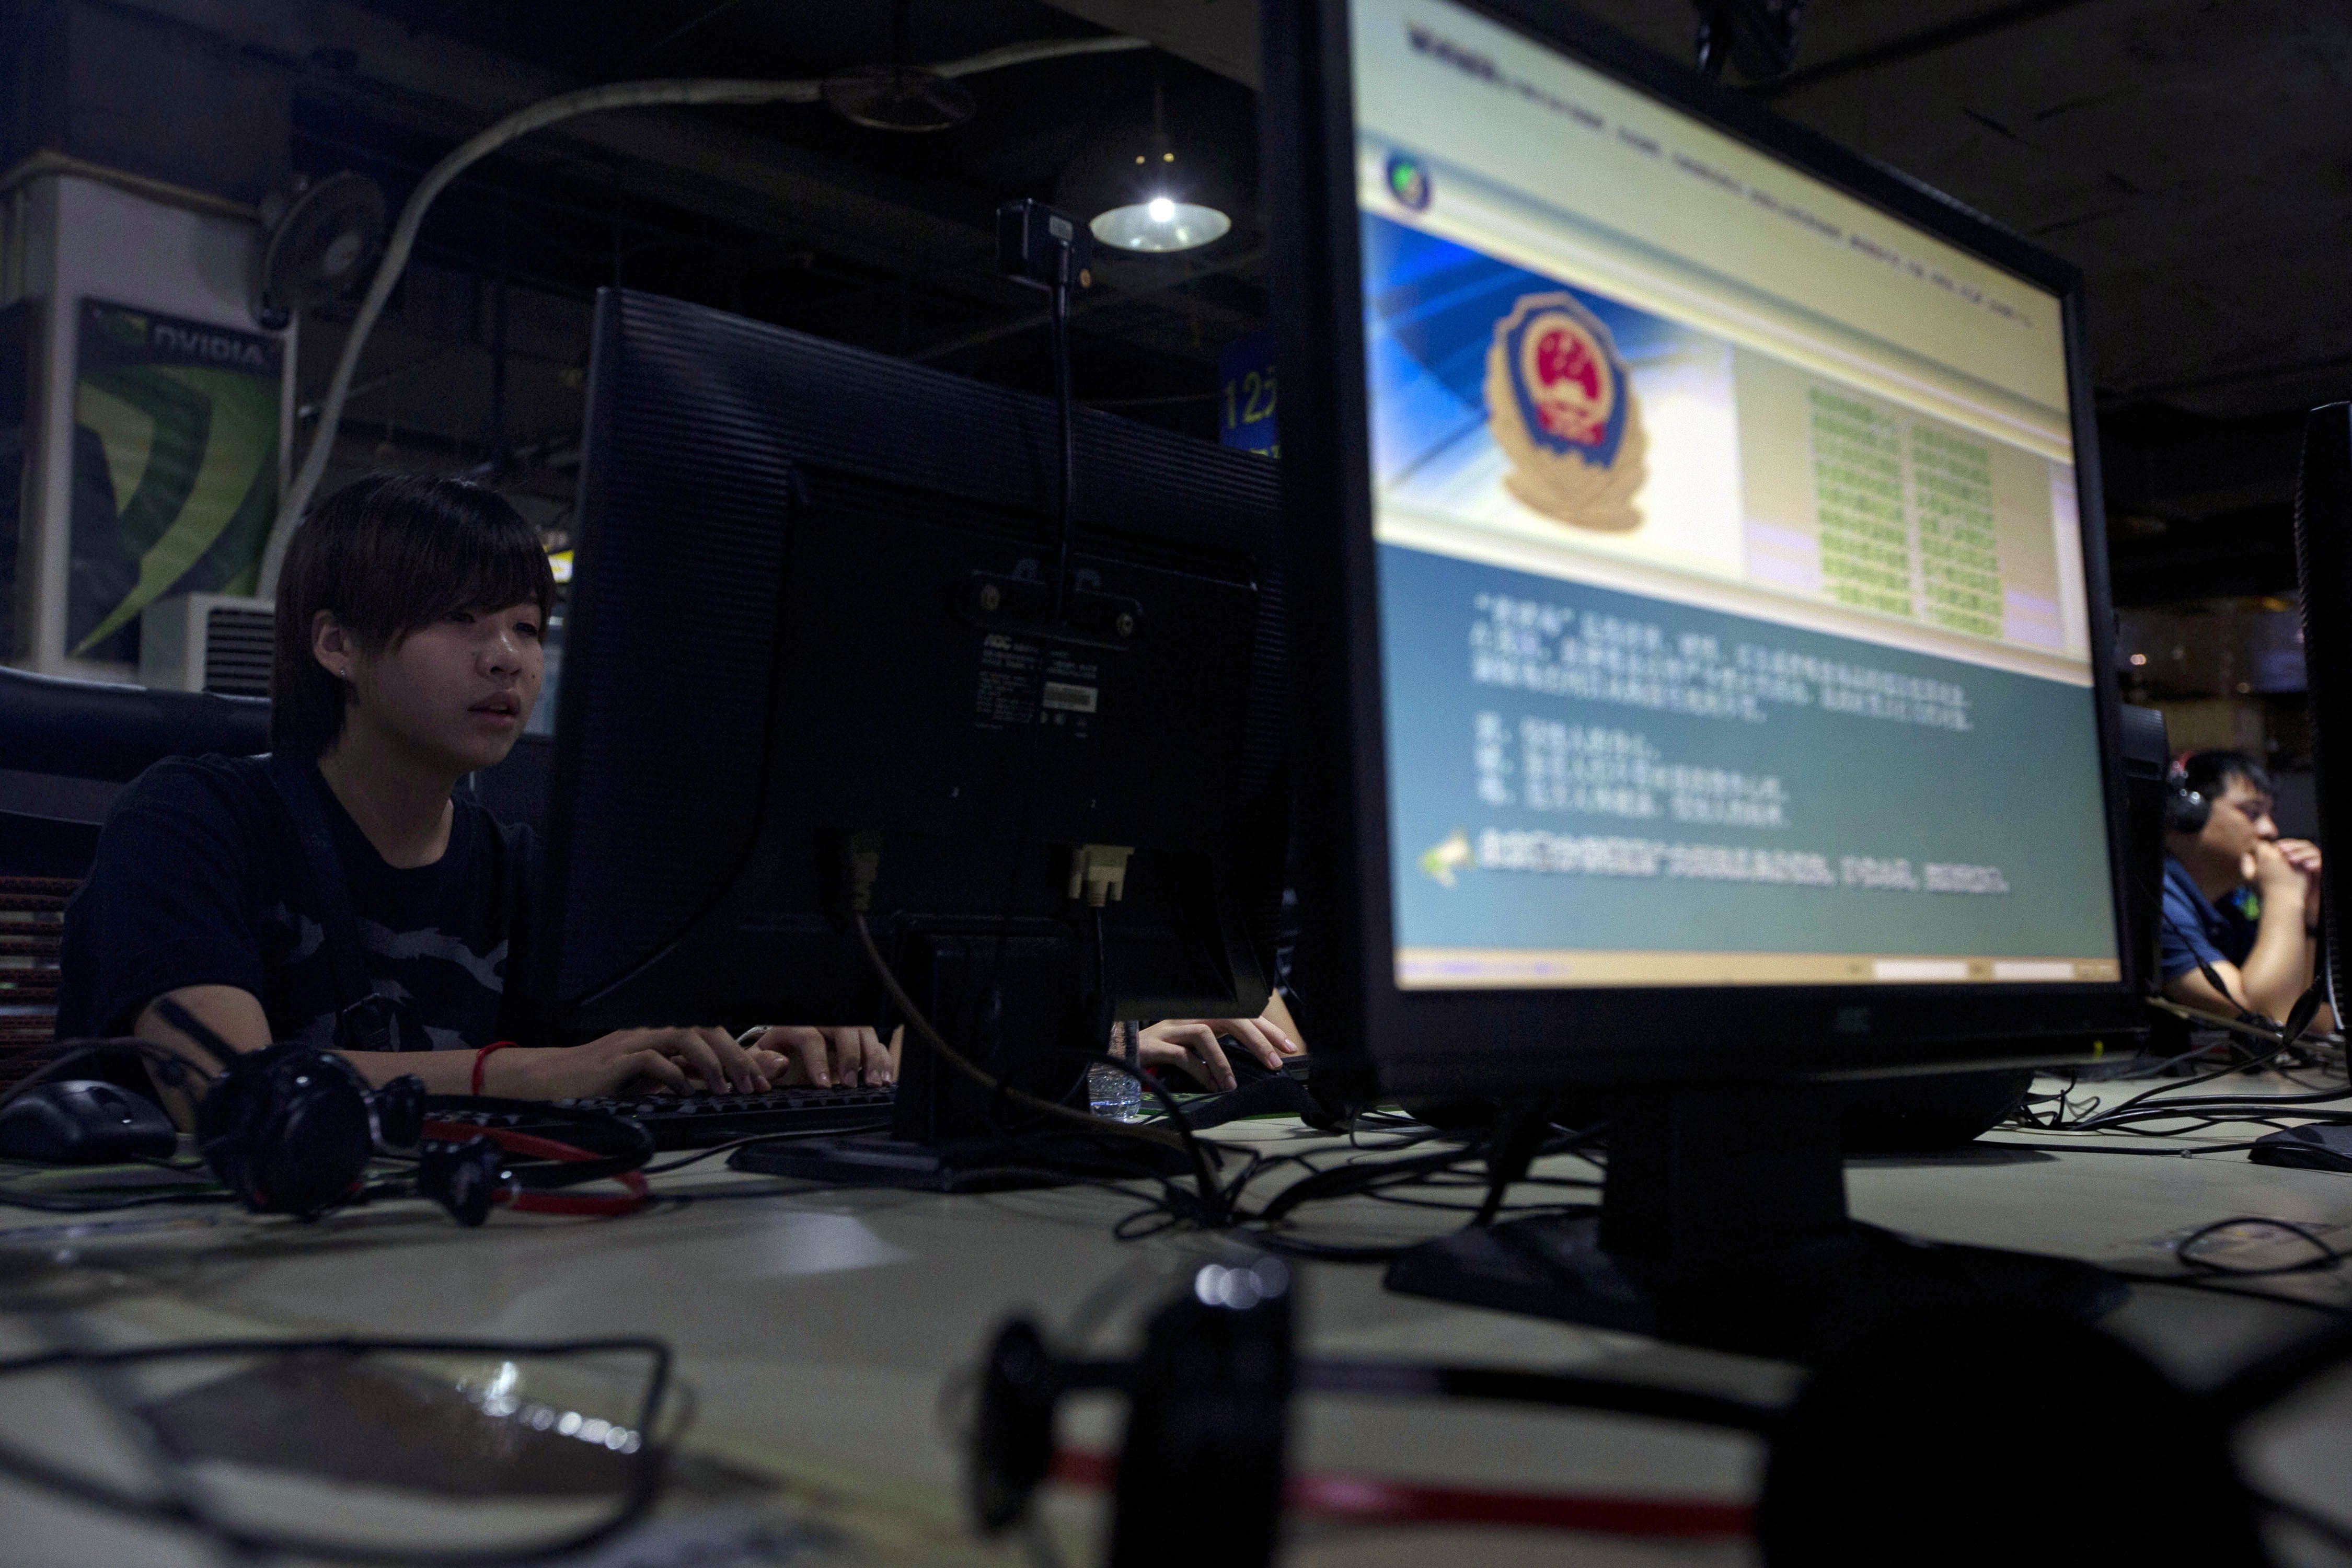 China’s VPN Crackdown Weighs on Foreign Companies There